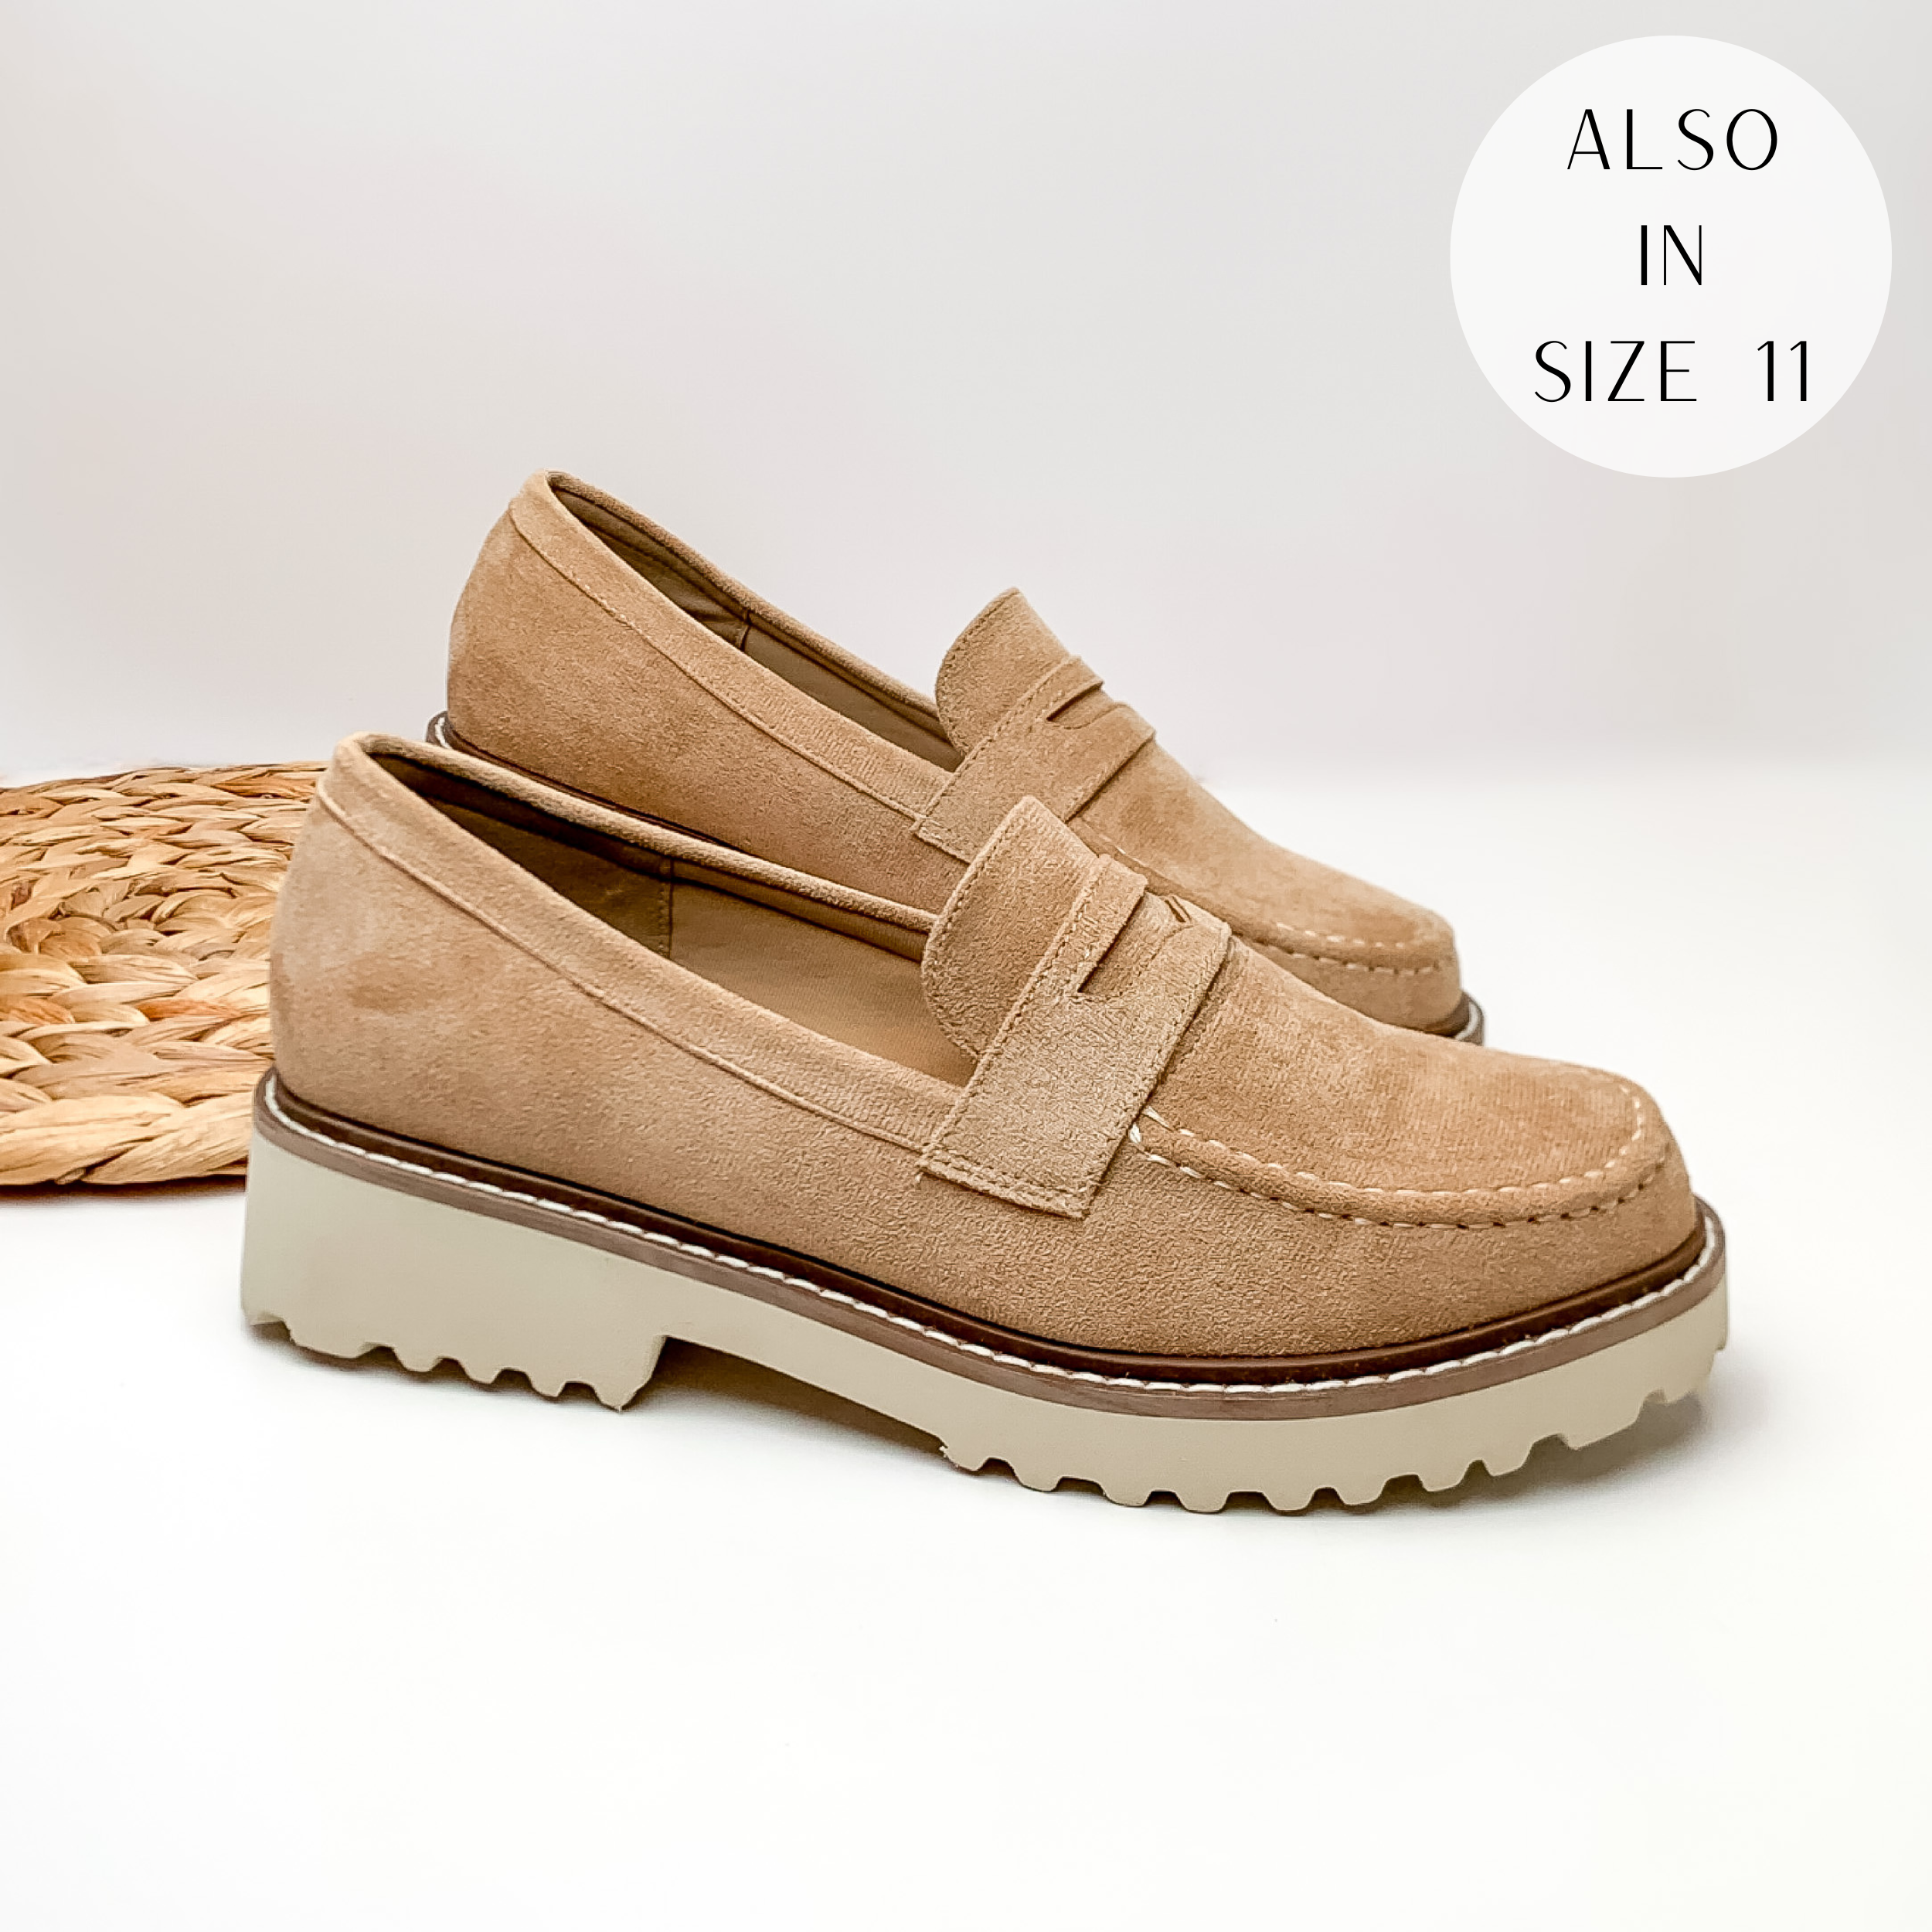 Tan suede slip on loafers with a white rubber sole. These loafers are pictured laying on a white background.